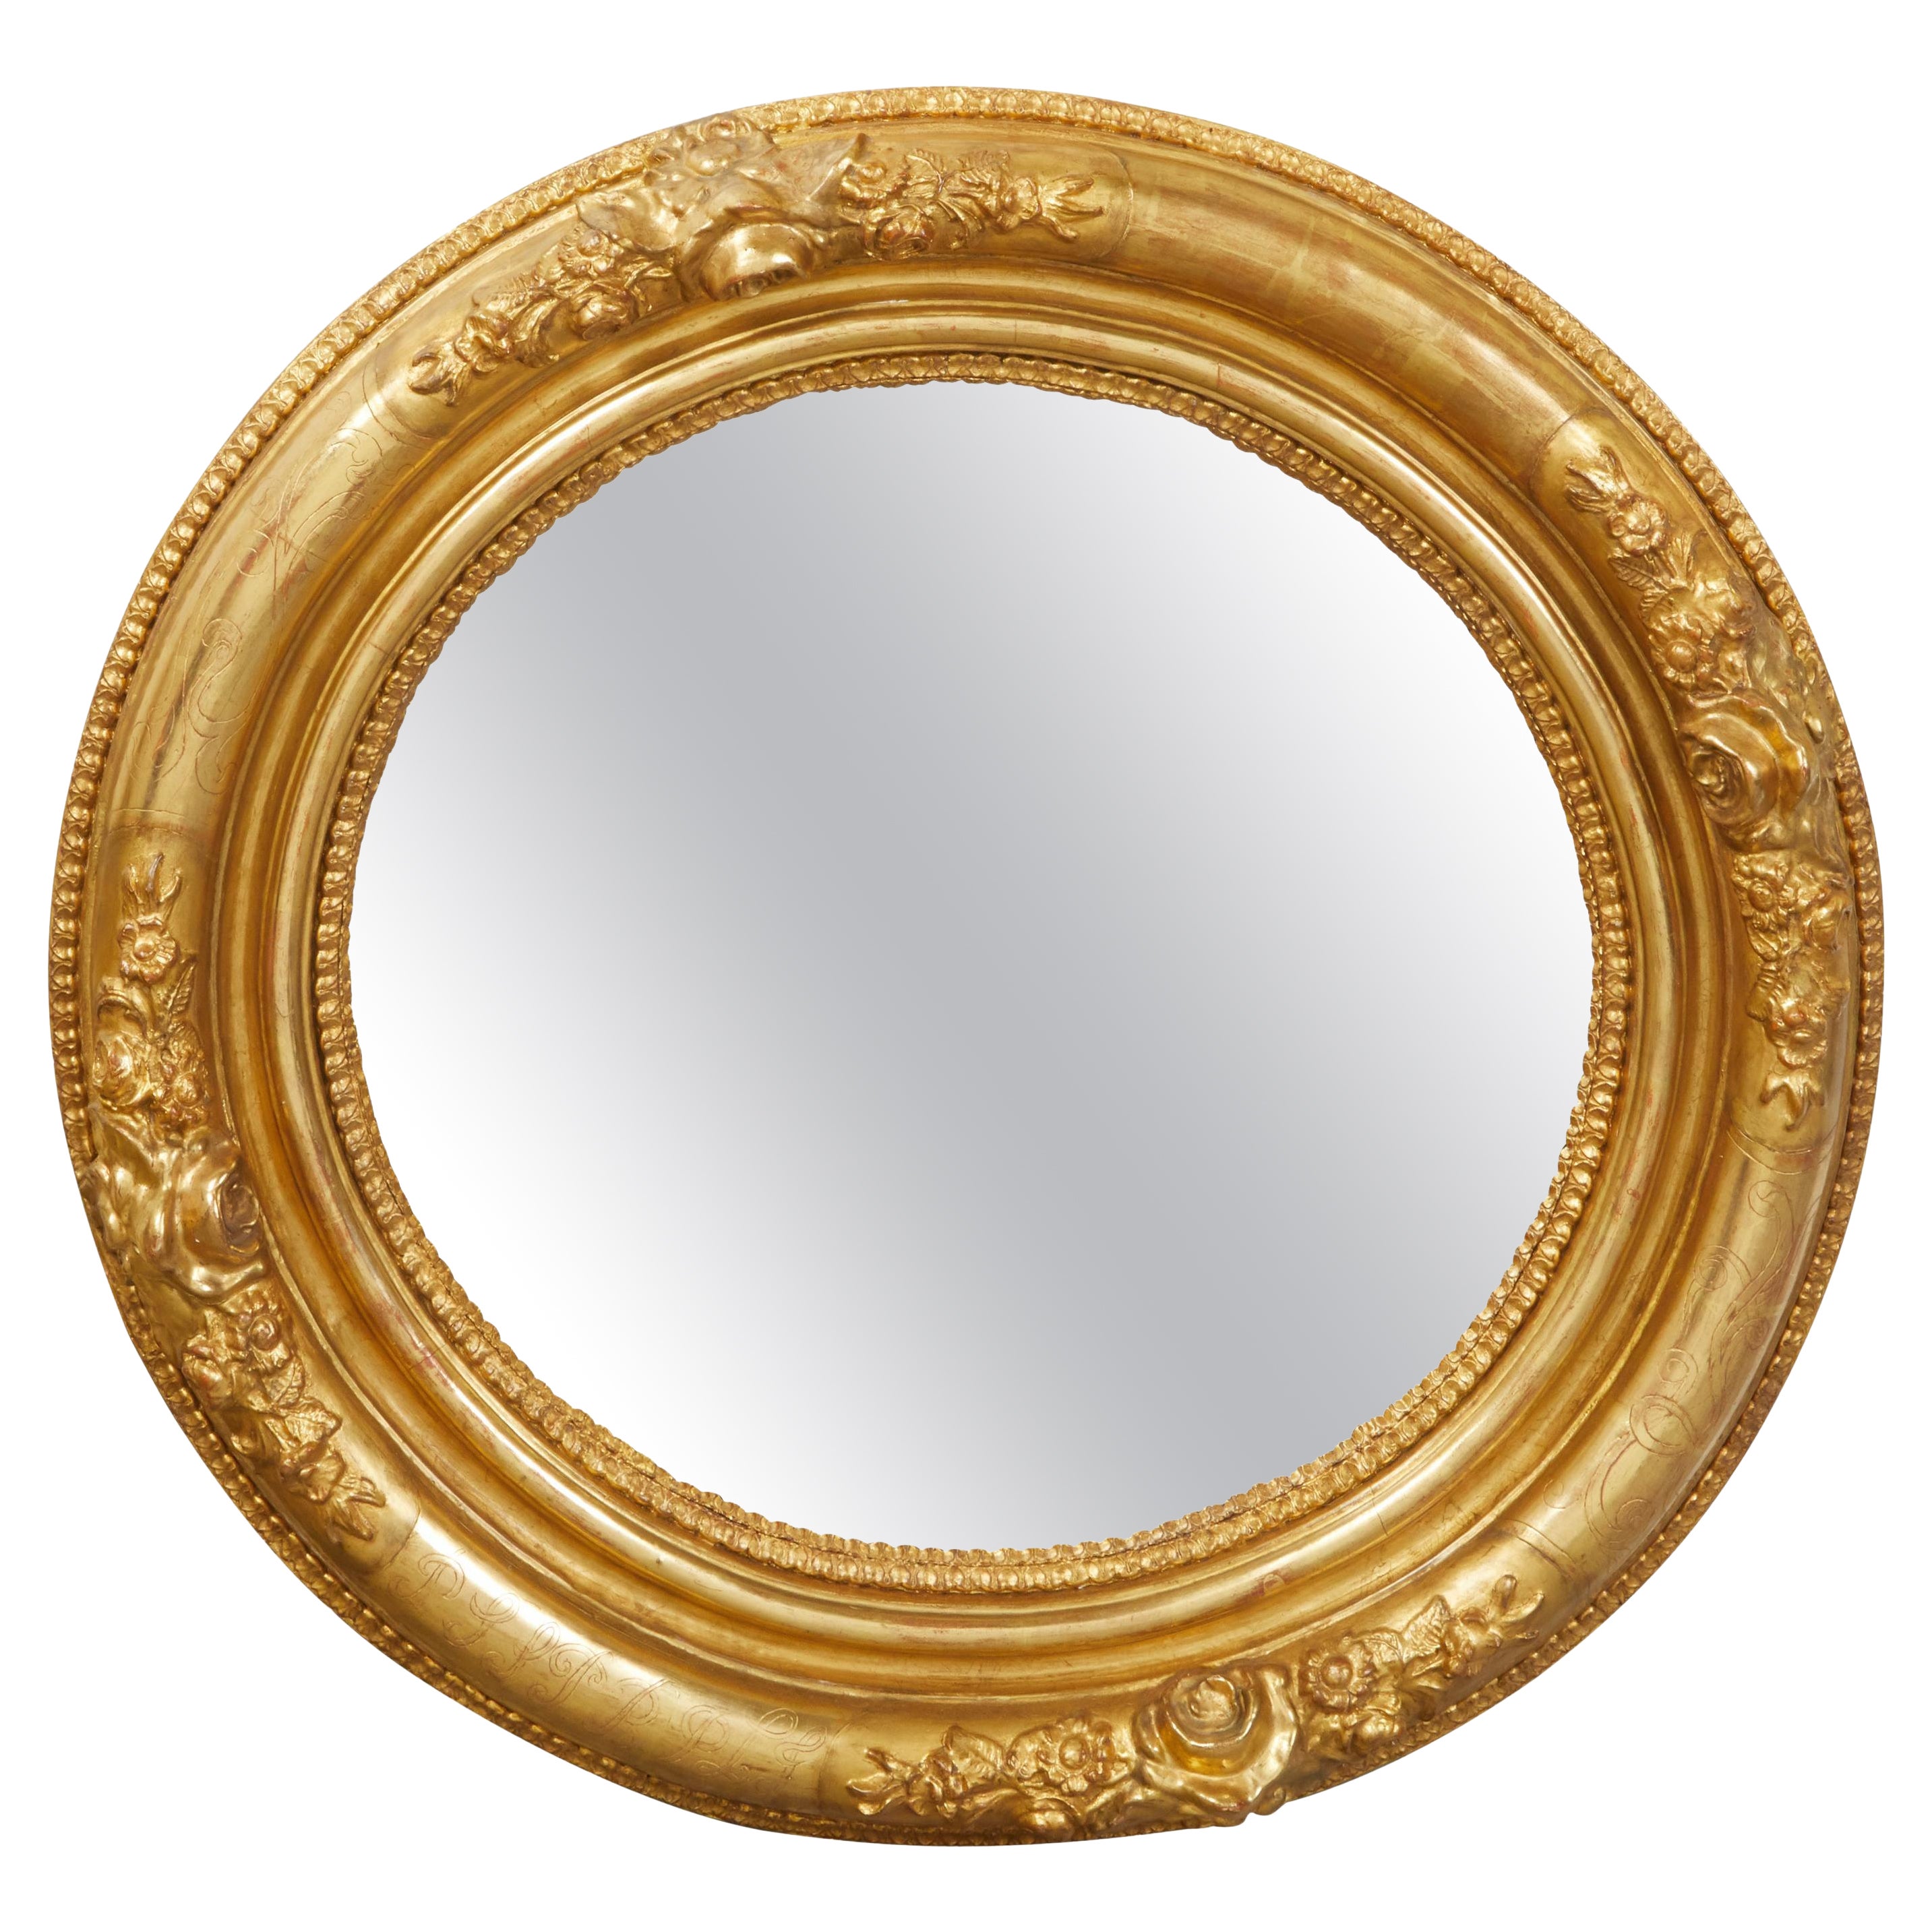 English 19th Century Round Giltwood Mirror with Carved Flowers and Etched Motifs For Sale